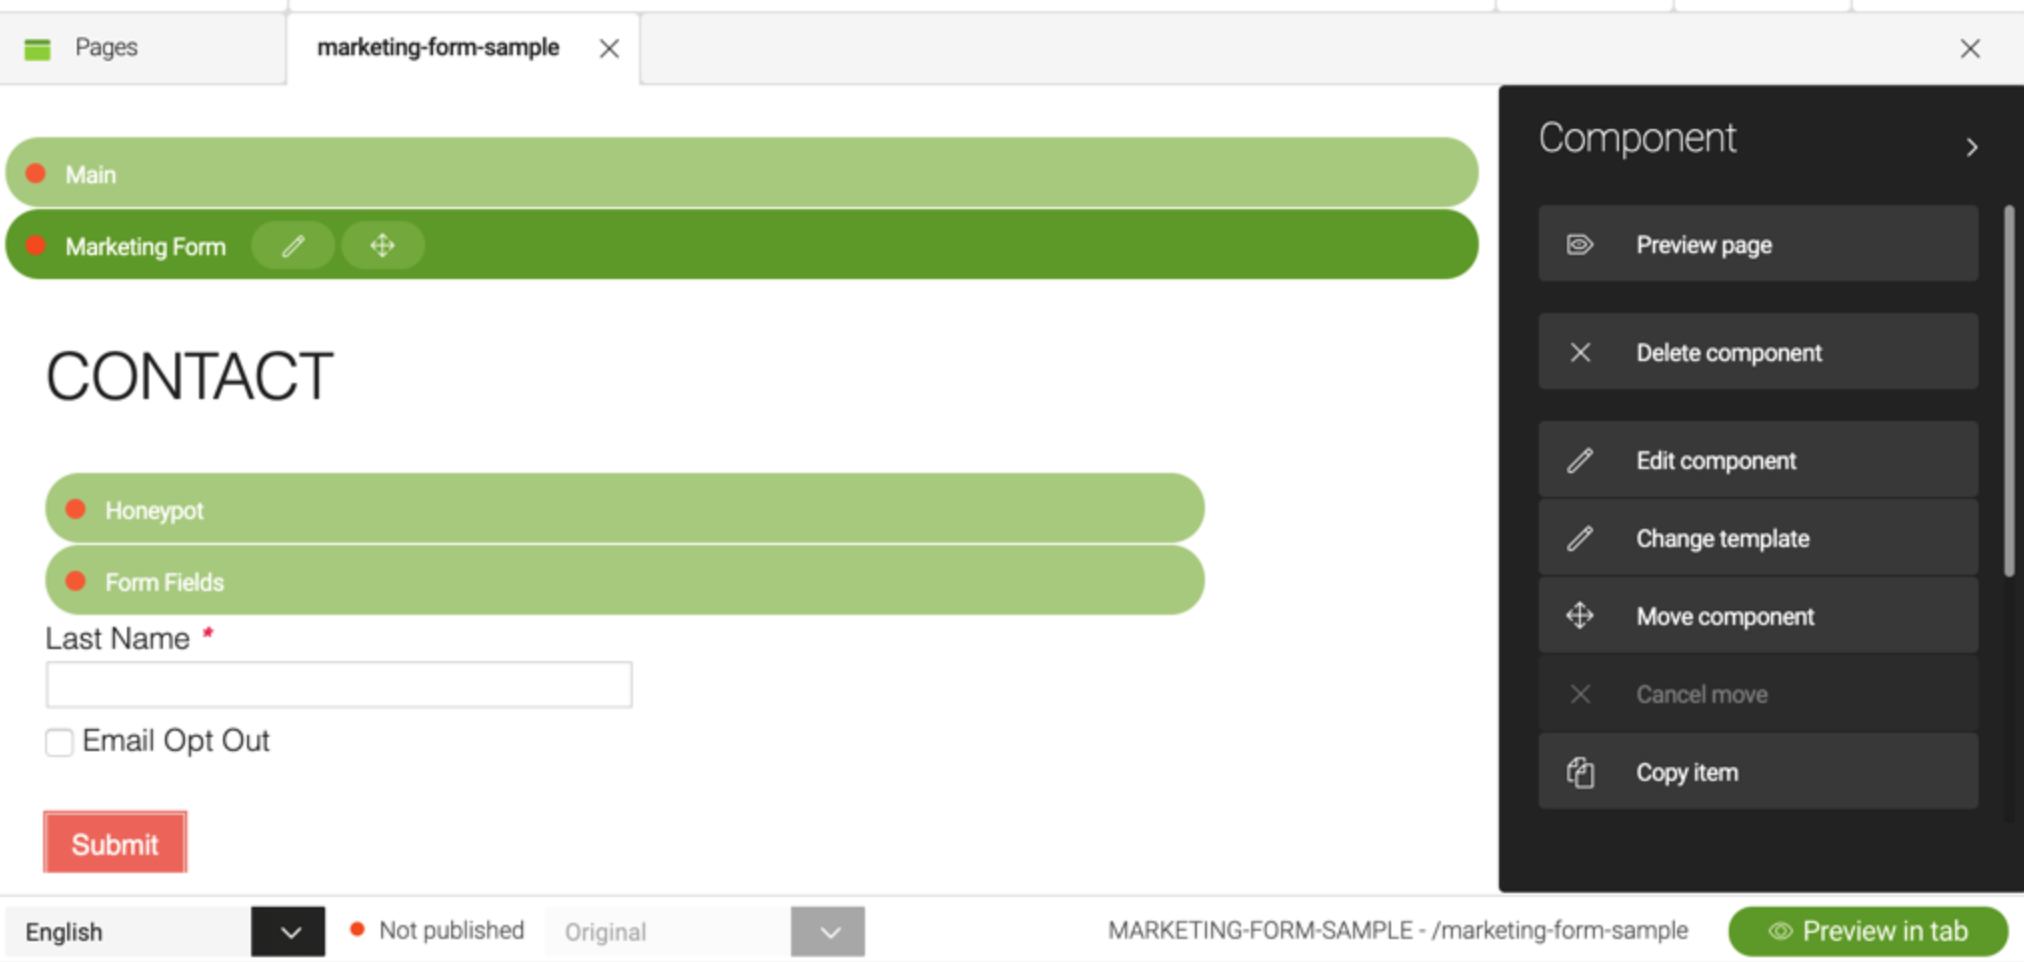 Marketing automation form in Pages app